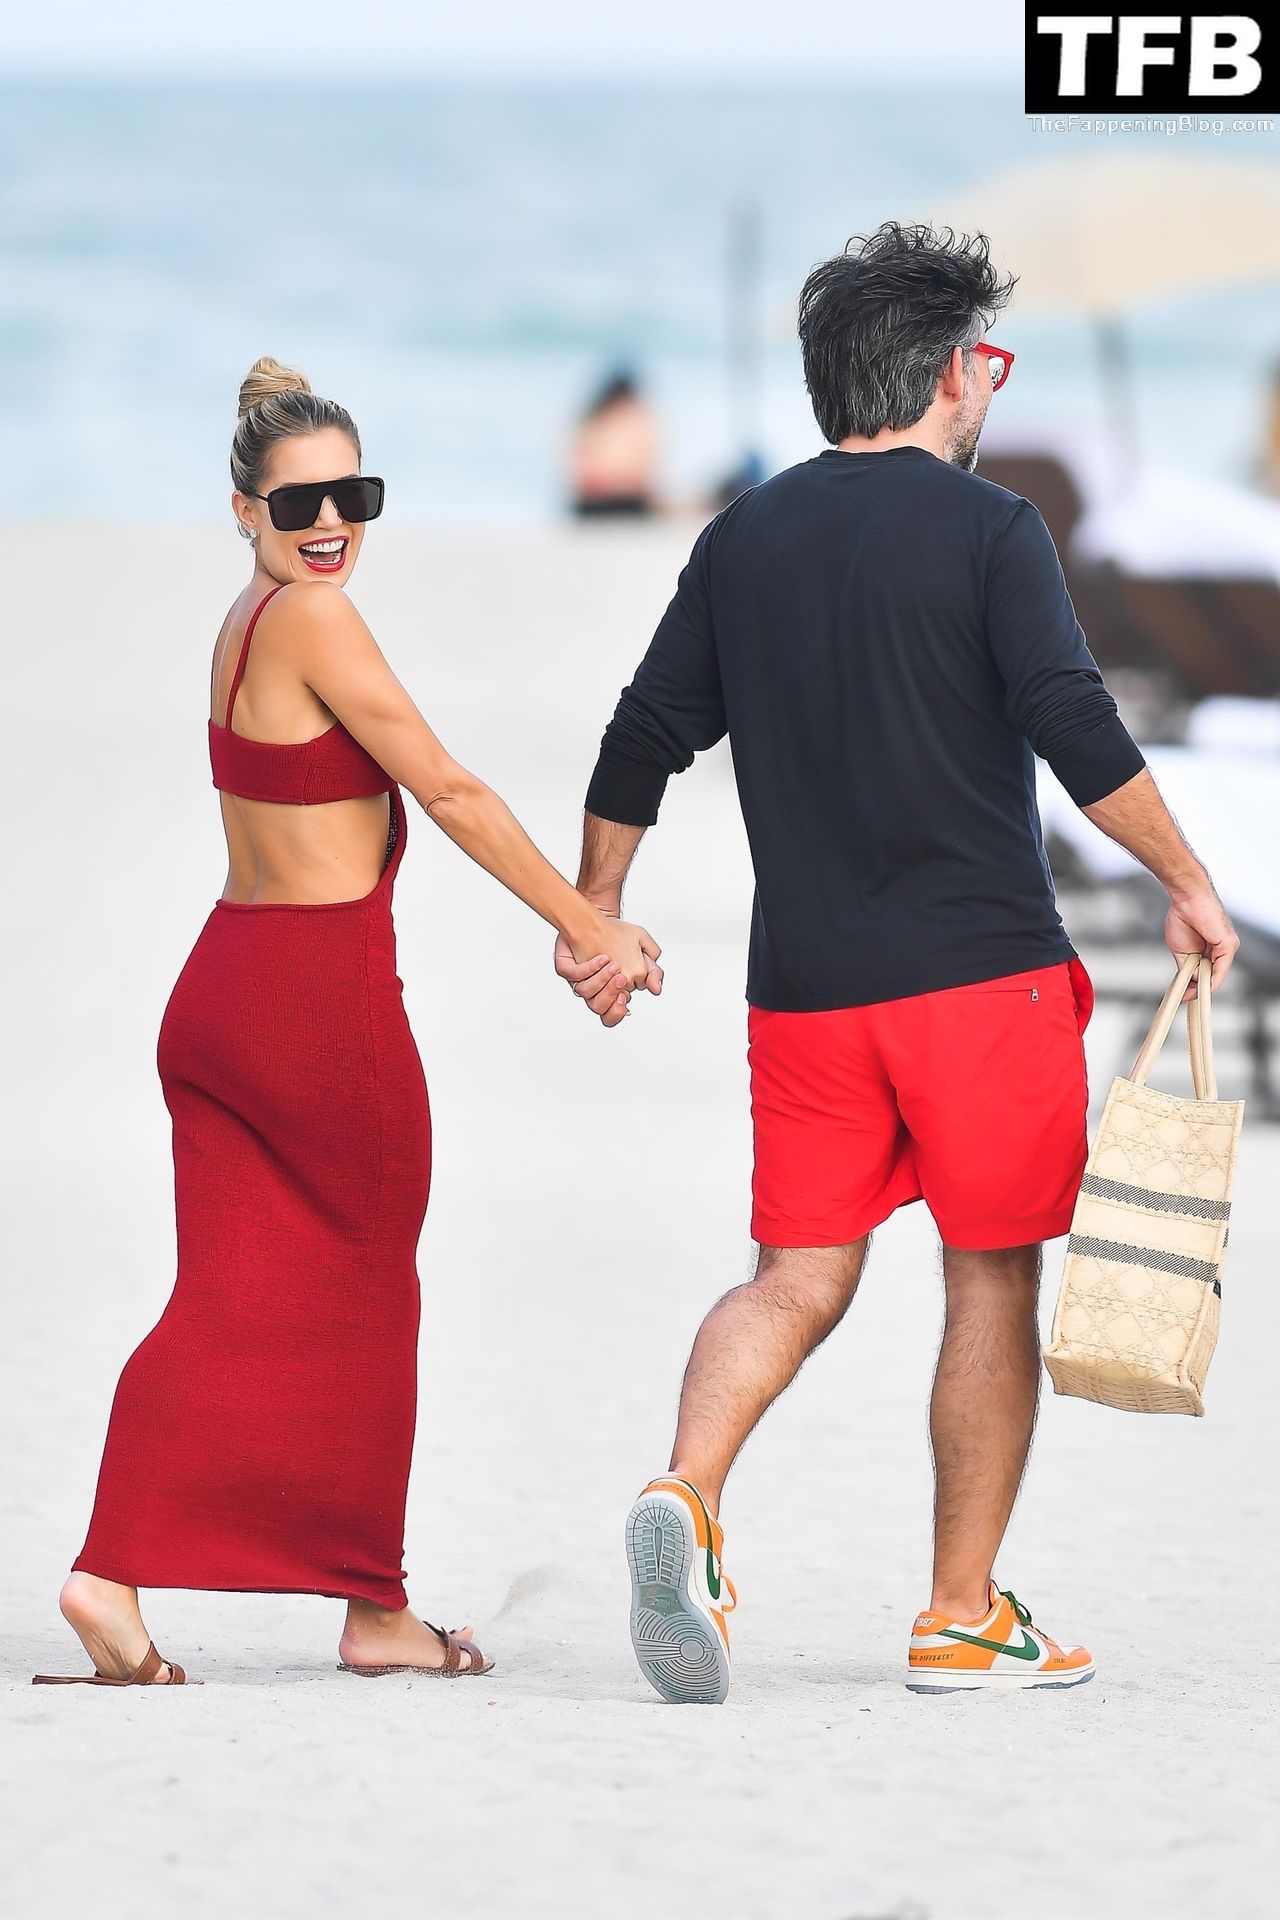 Sylvie Meis Gets Interviewed on the Beach in Miami (28 Photos)